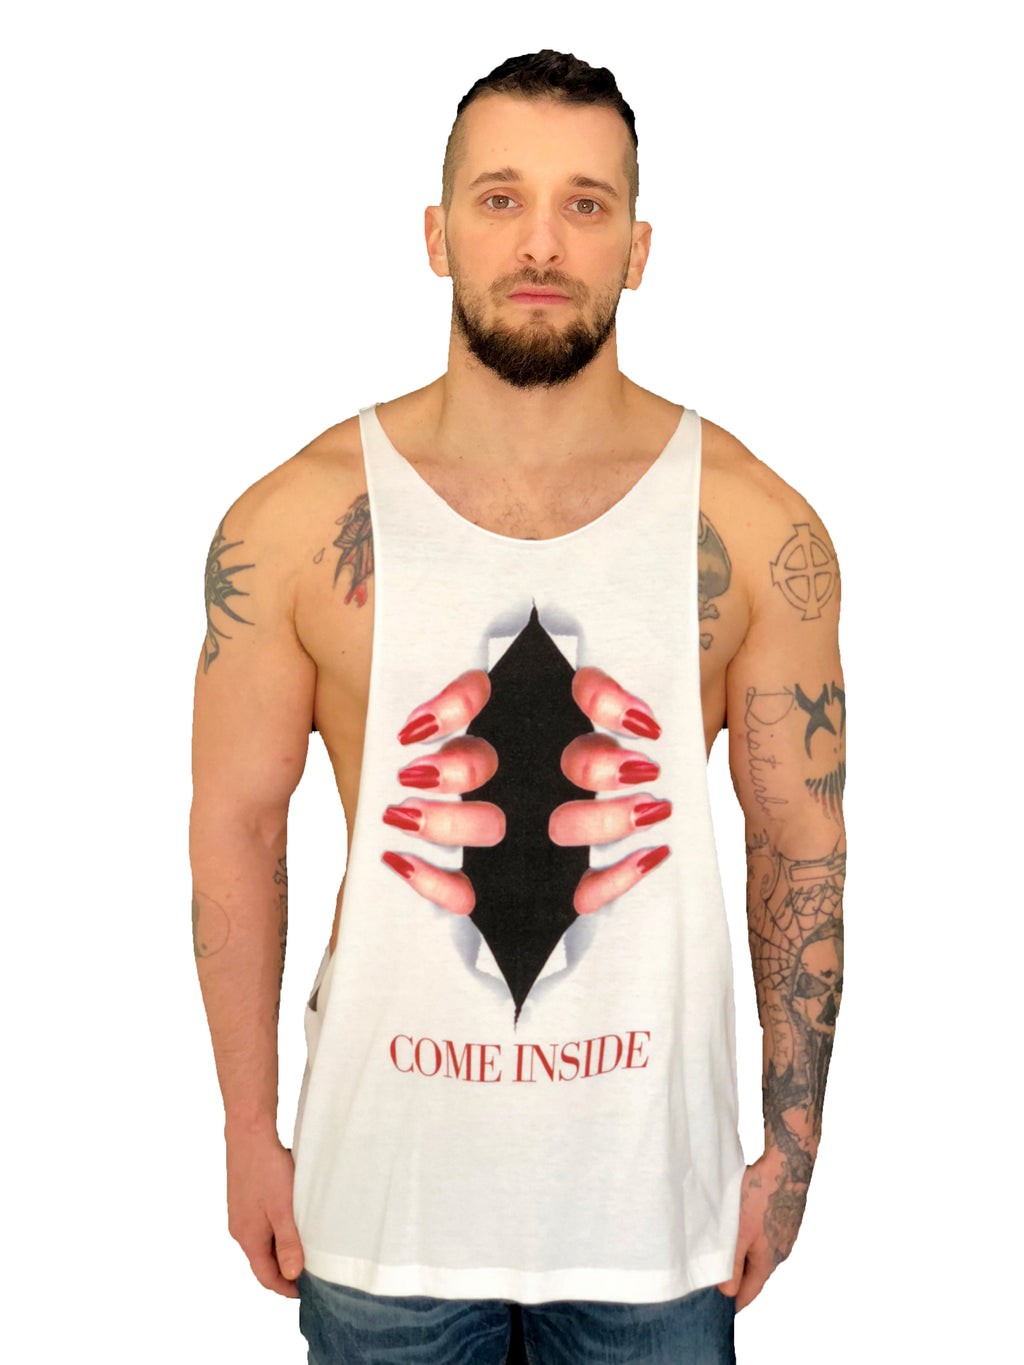 Men T-Shirt "Come Inside" Through the chest White by lacobuccyounes Italy - Brit Boss 